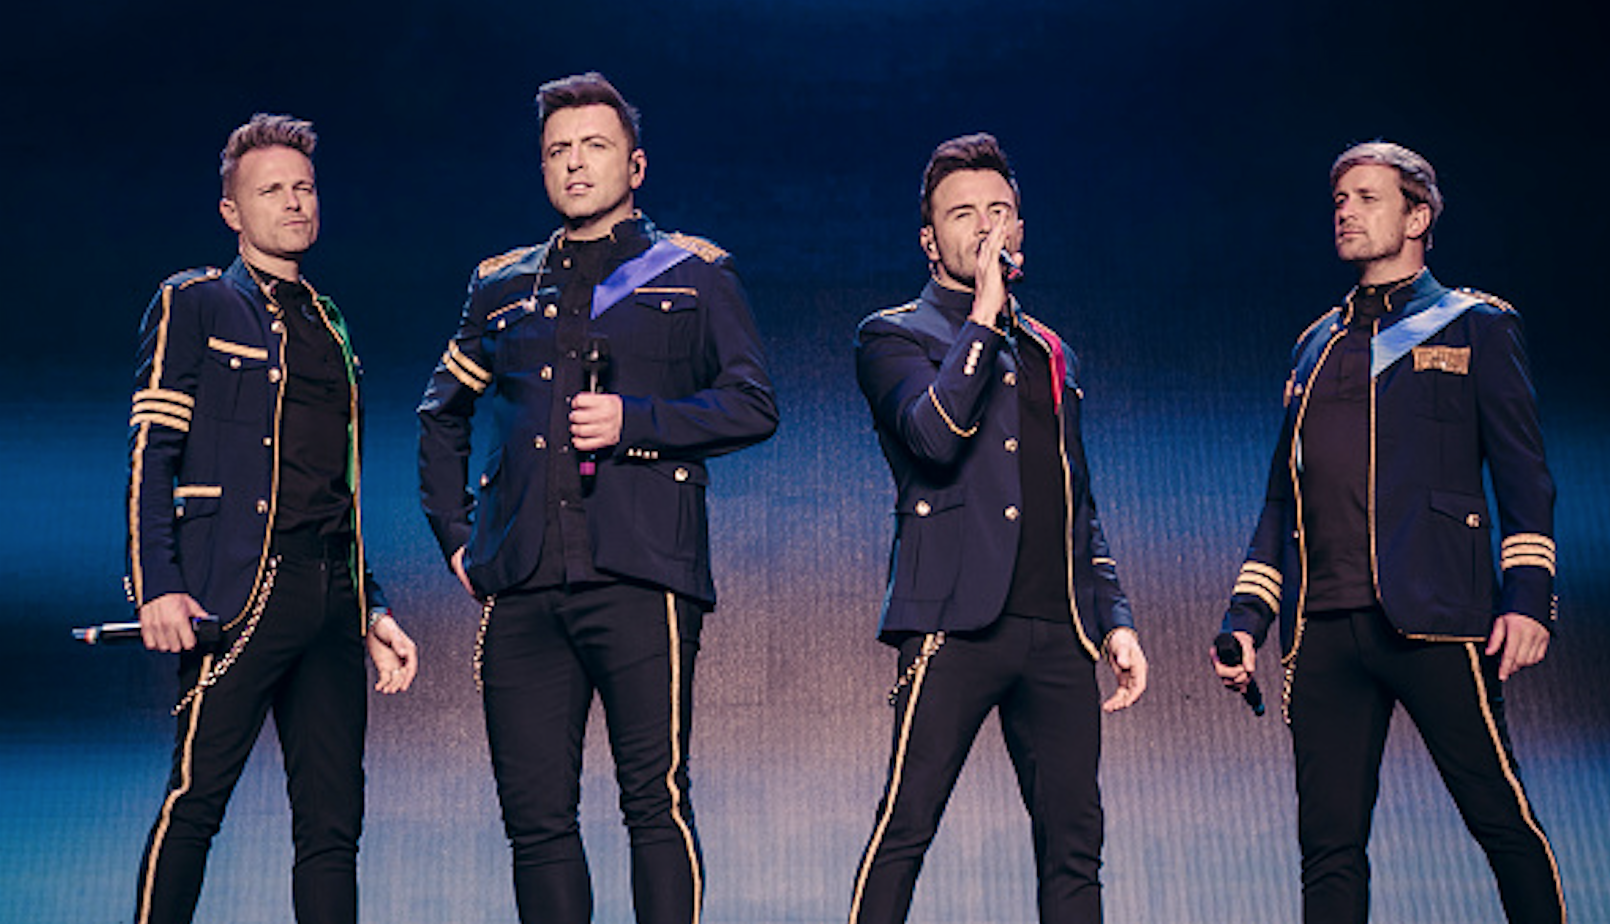 Westlife ask fans in Malaysia to get behind the search for missing Nora Quoirin